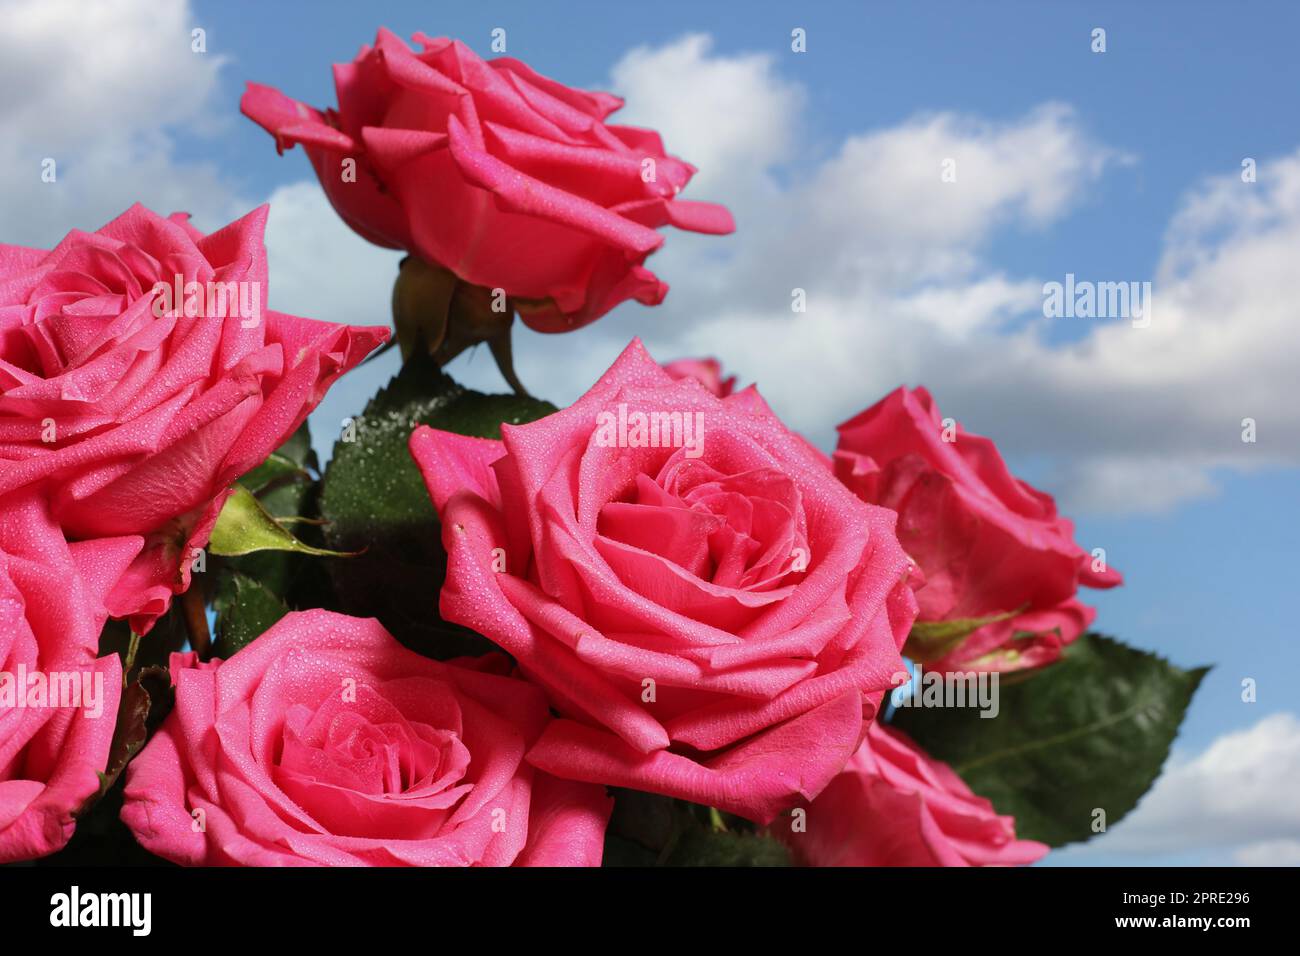 Bouquet of Fresh Pink Roses outdoors with blue sky in background Stock Photo